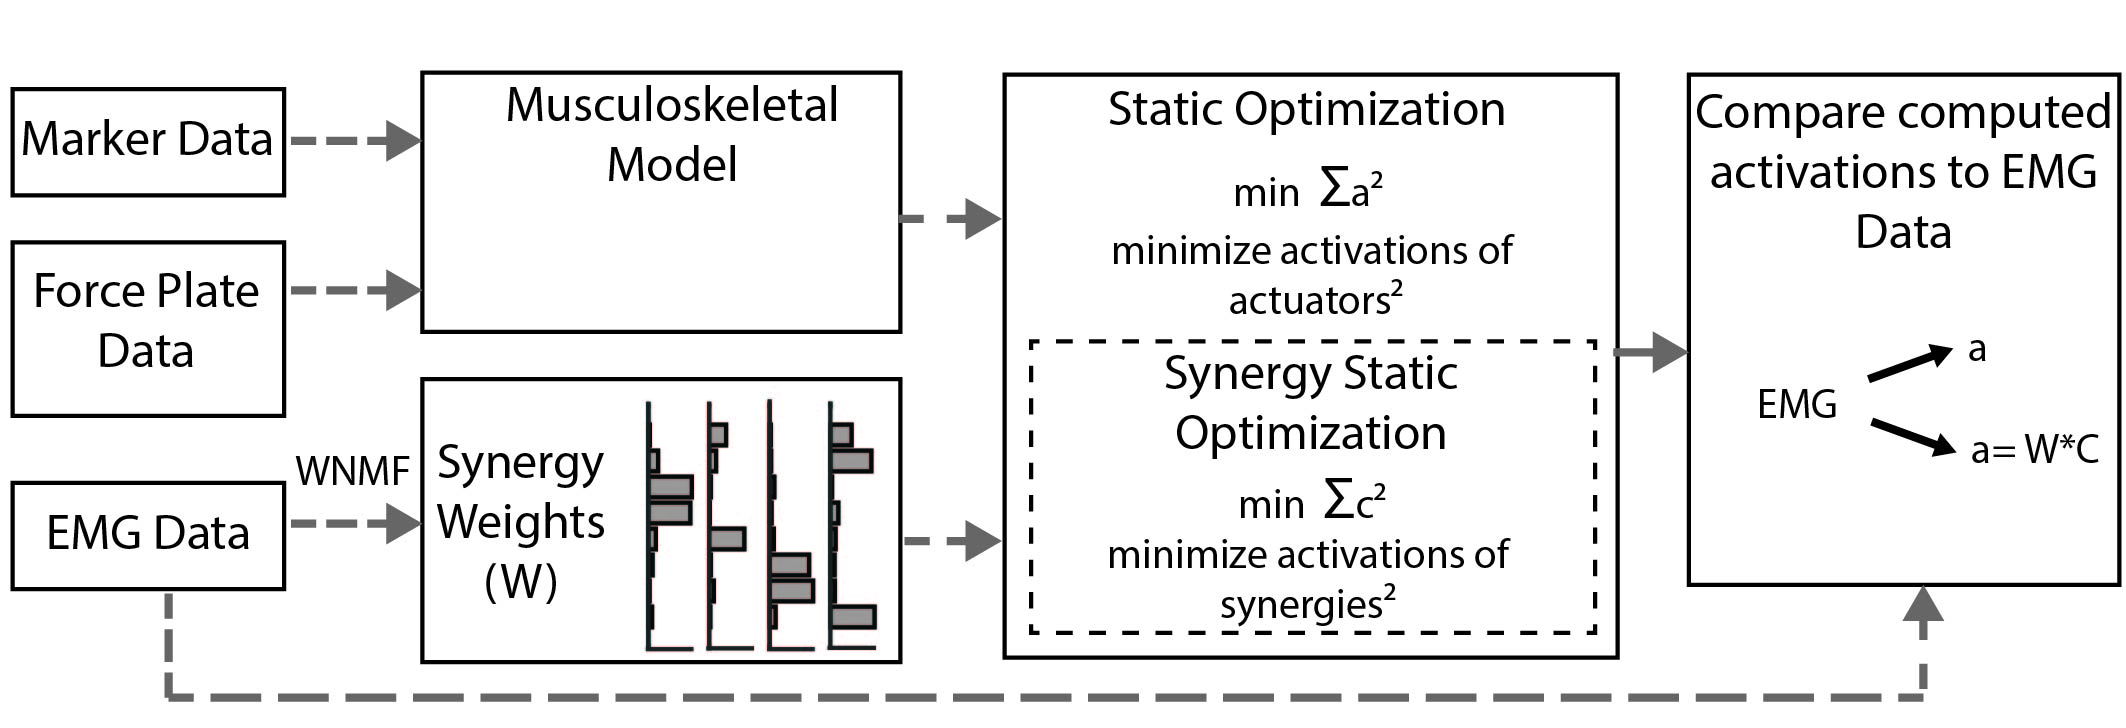 figure depicting flow chart with modeling optimization and muscle activity